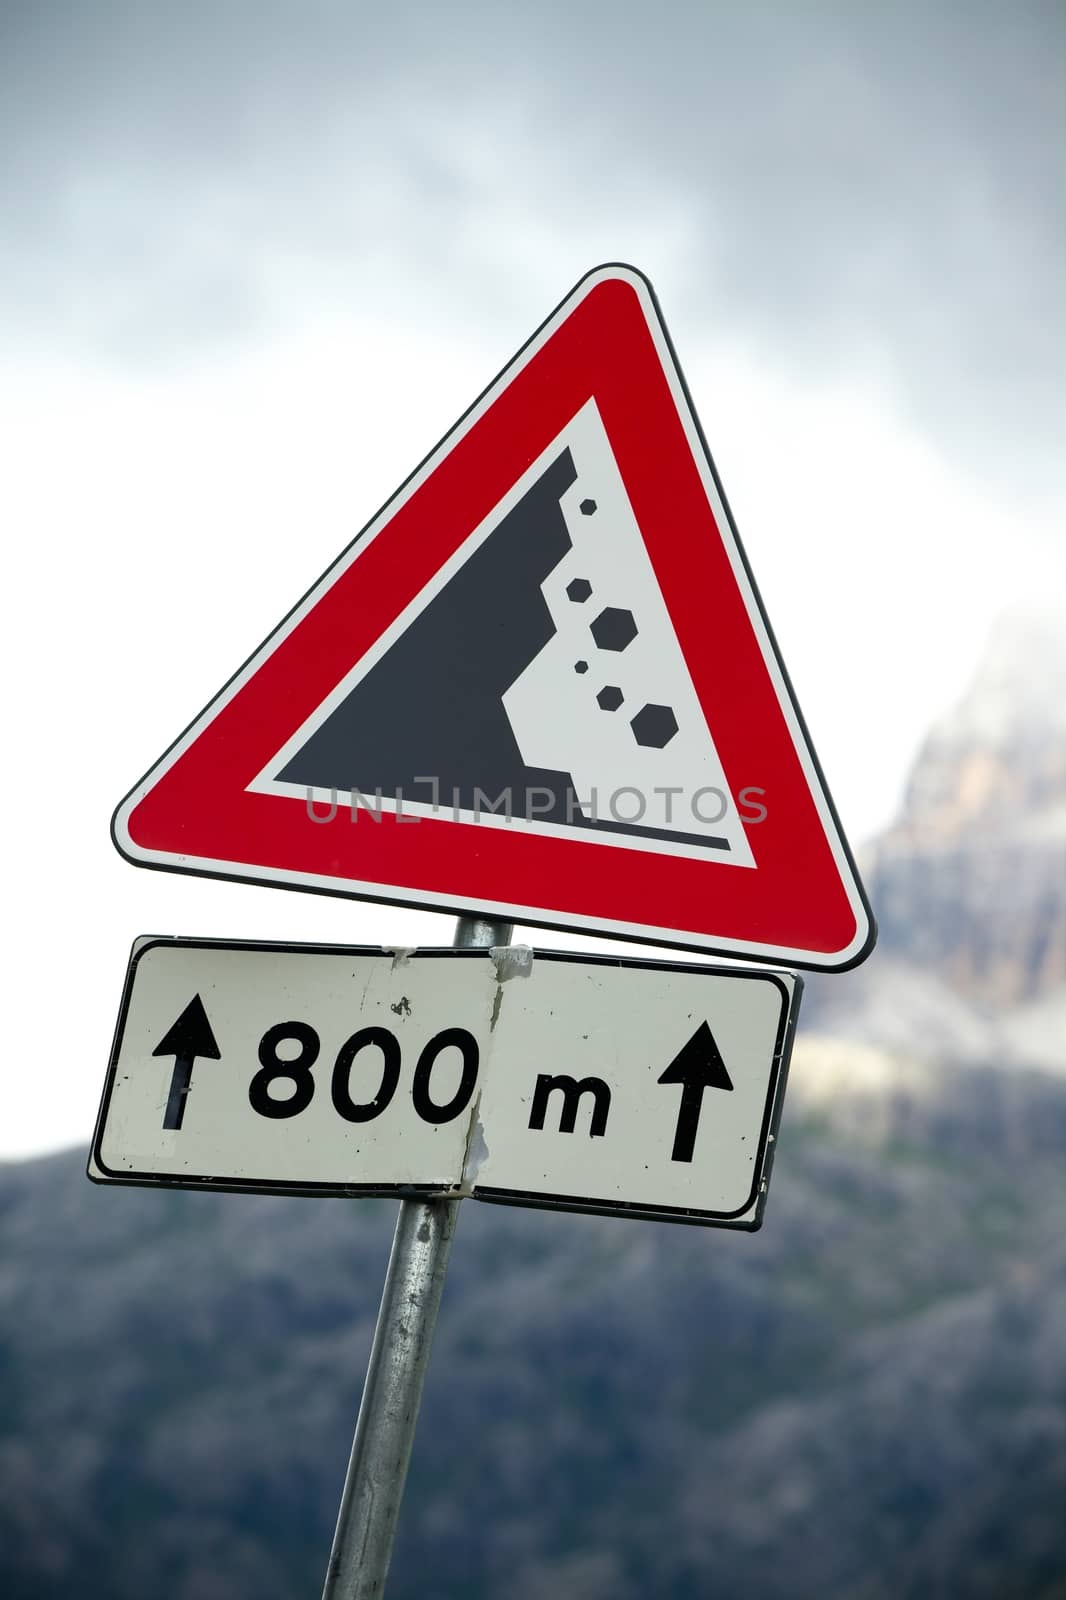 Warning sign of falling rocks on a mountain road